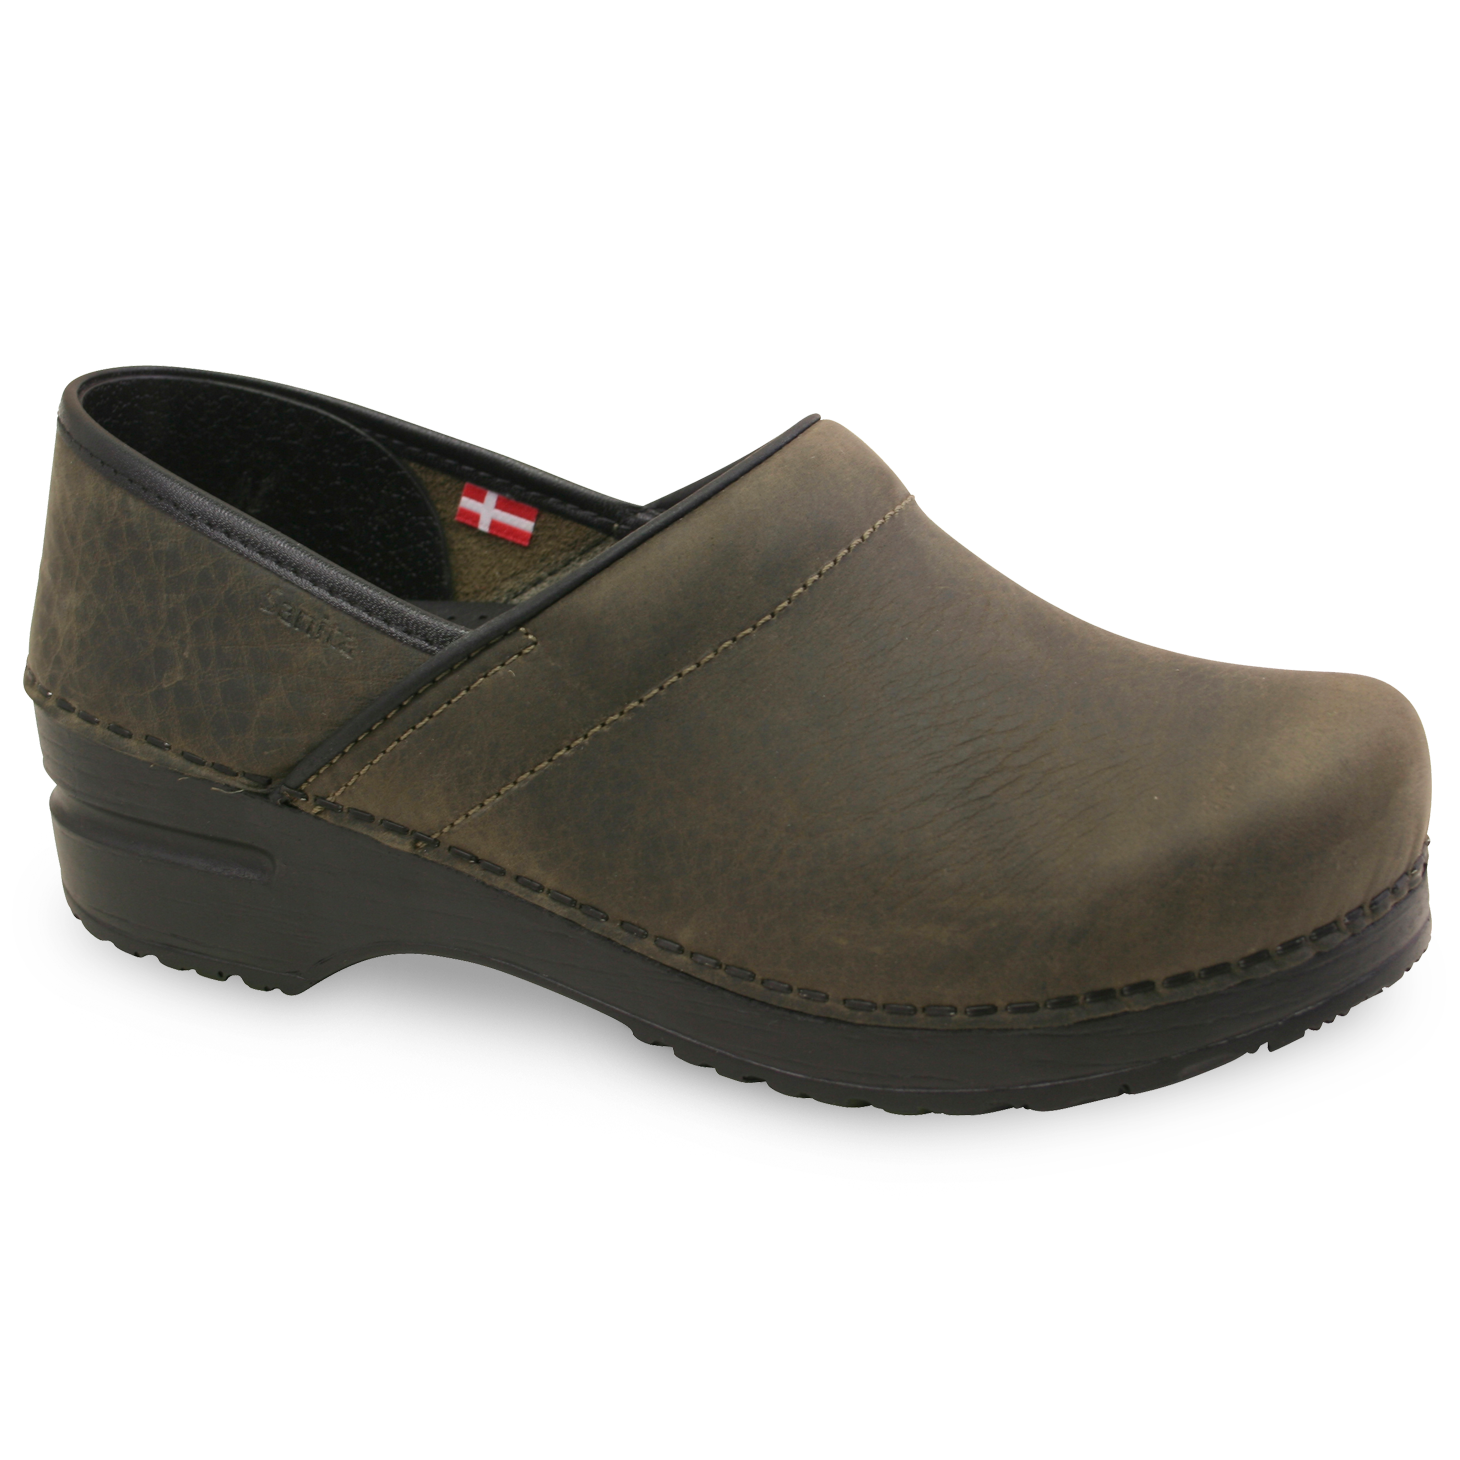 Pro. Oiled Leather Women's - Olive - Second